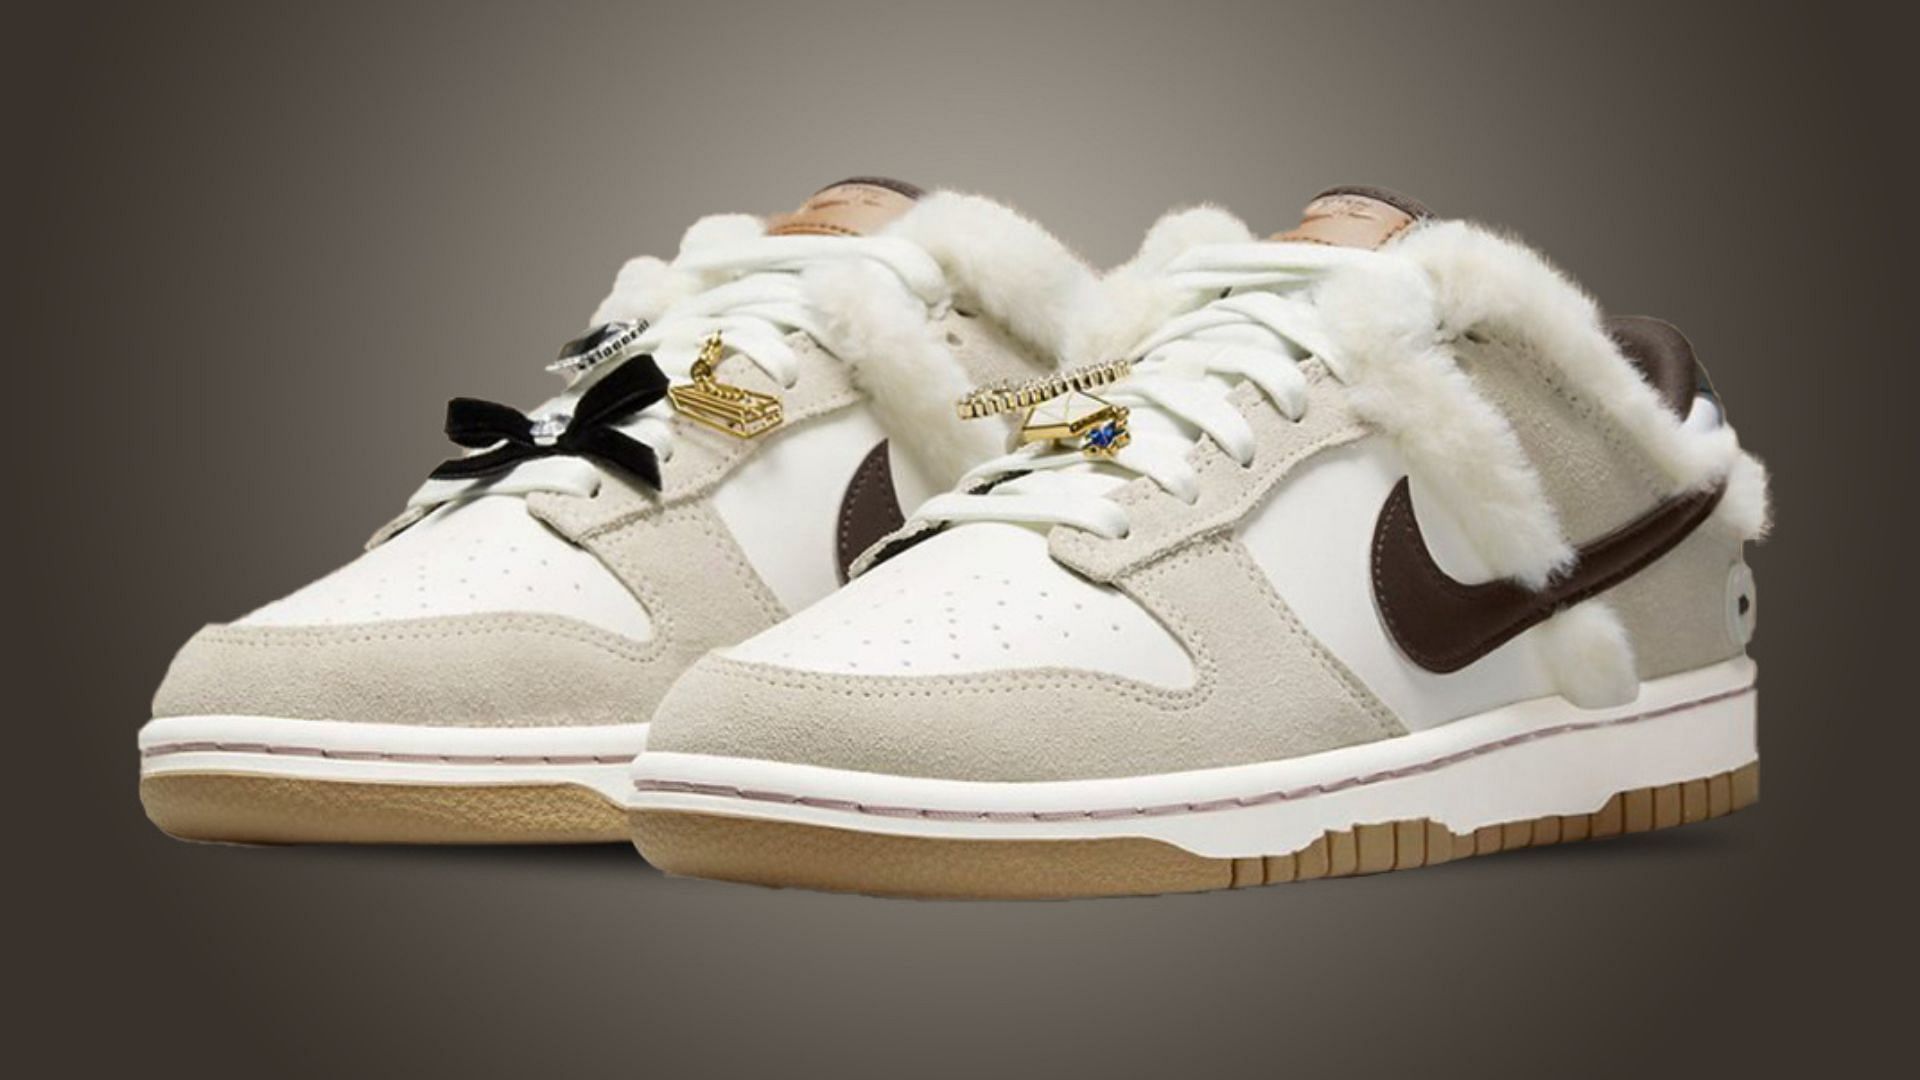 Nike Dunk Low Fur and Bling shoes (Image via Sole Retriever)